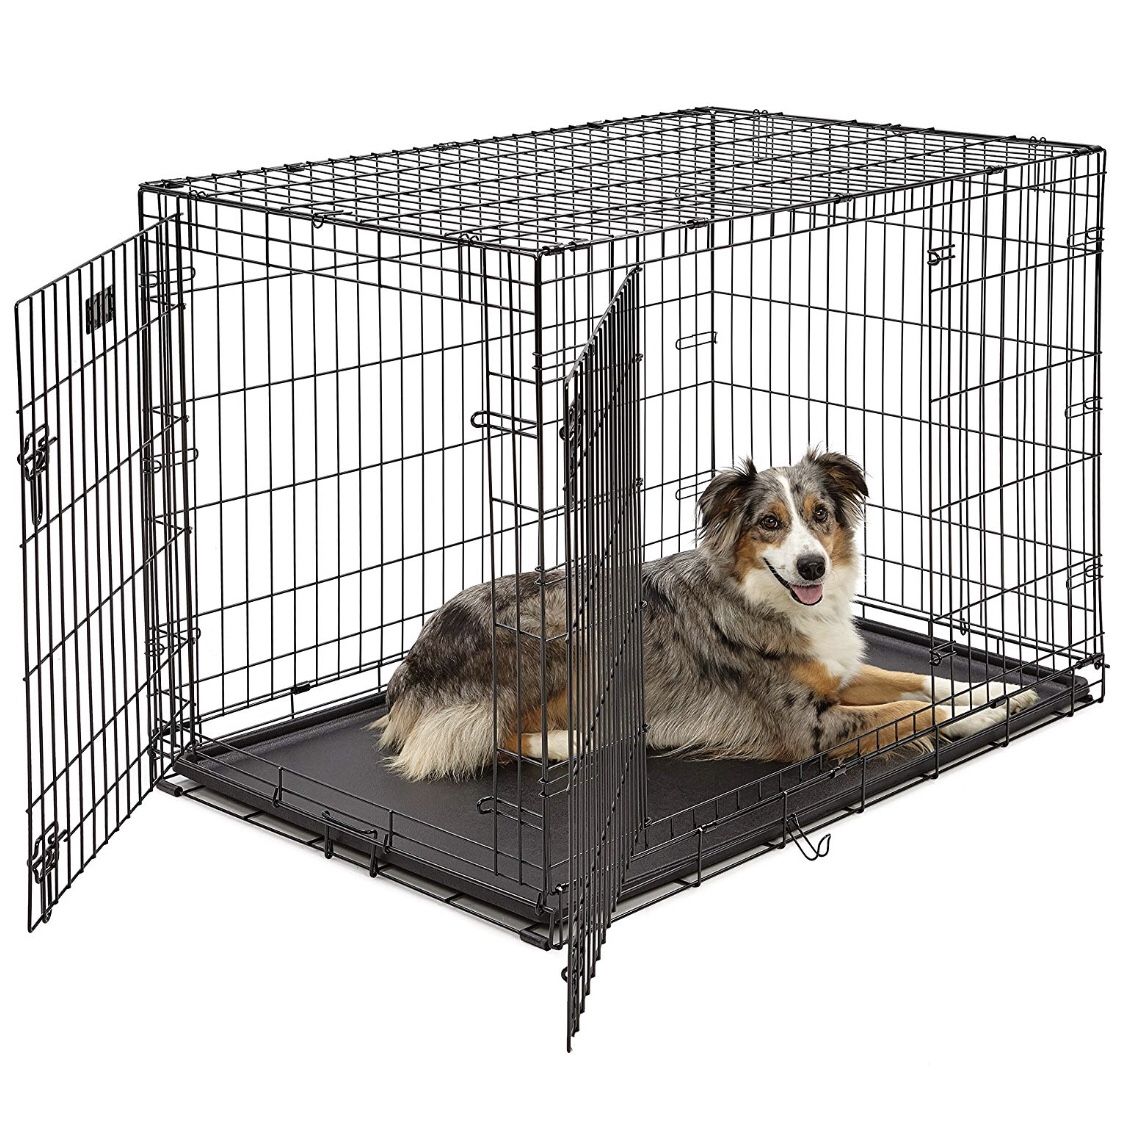 Midwest icrate Large Dog Crate